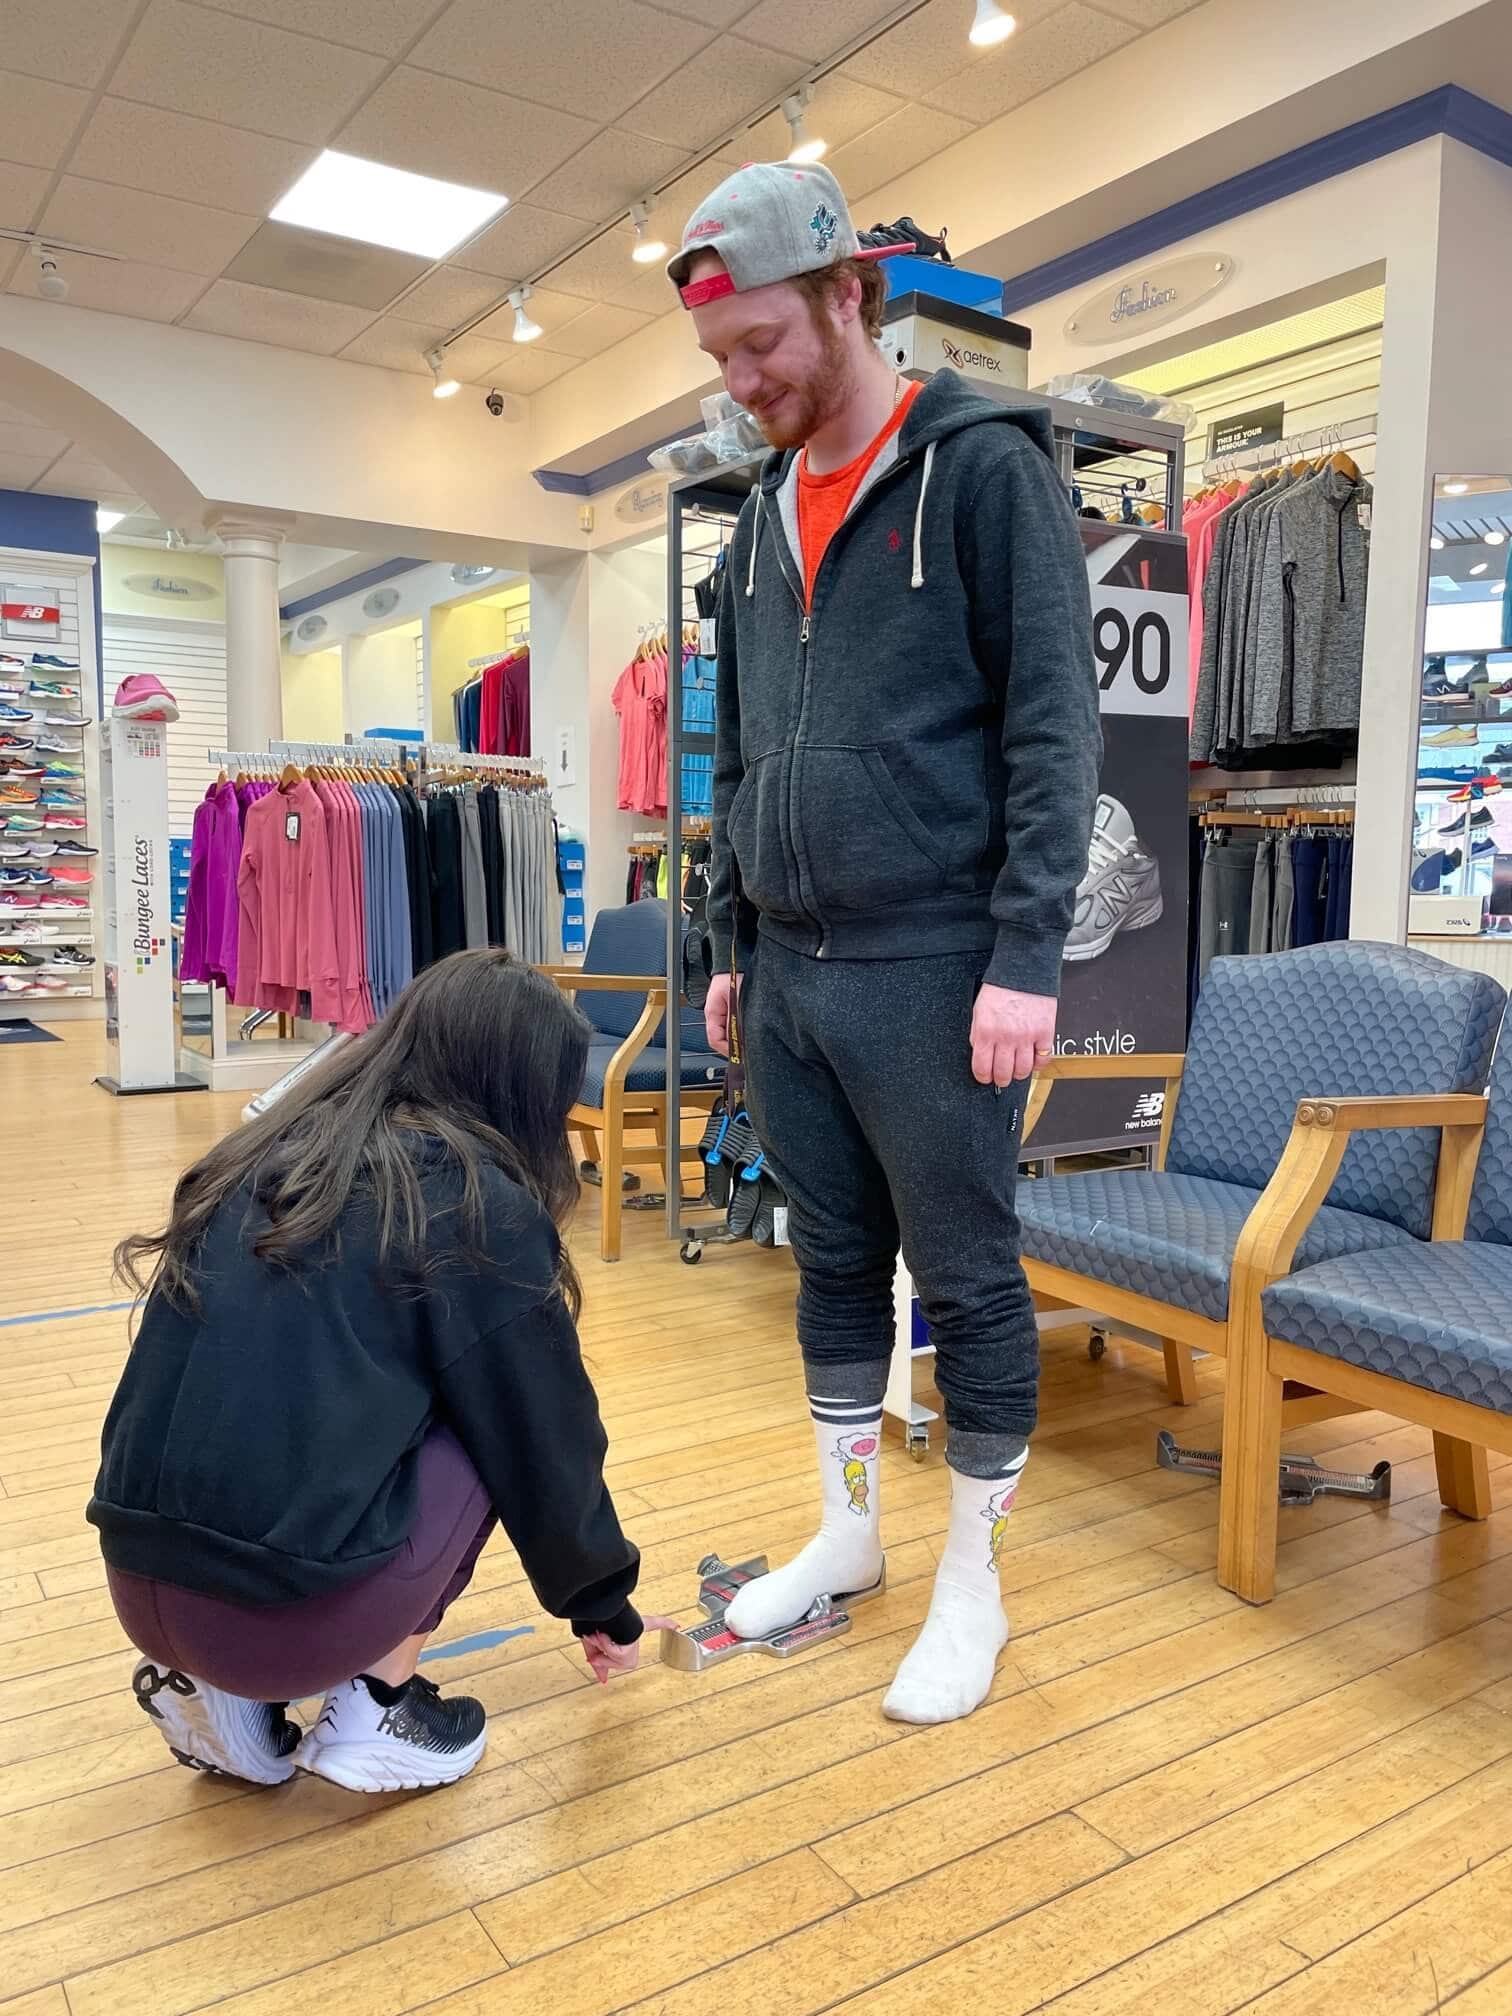 woman measuring both feet of man to check his size